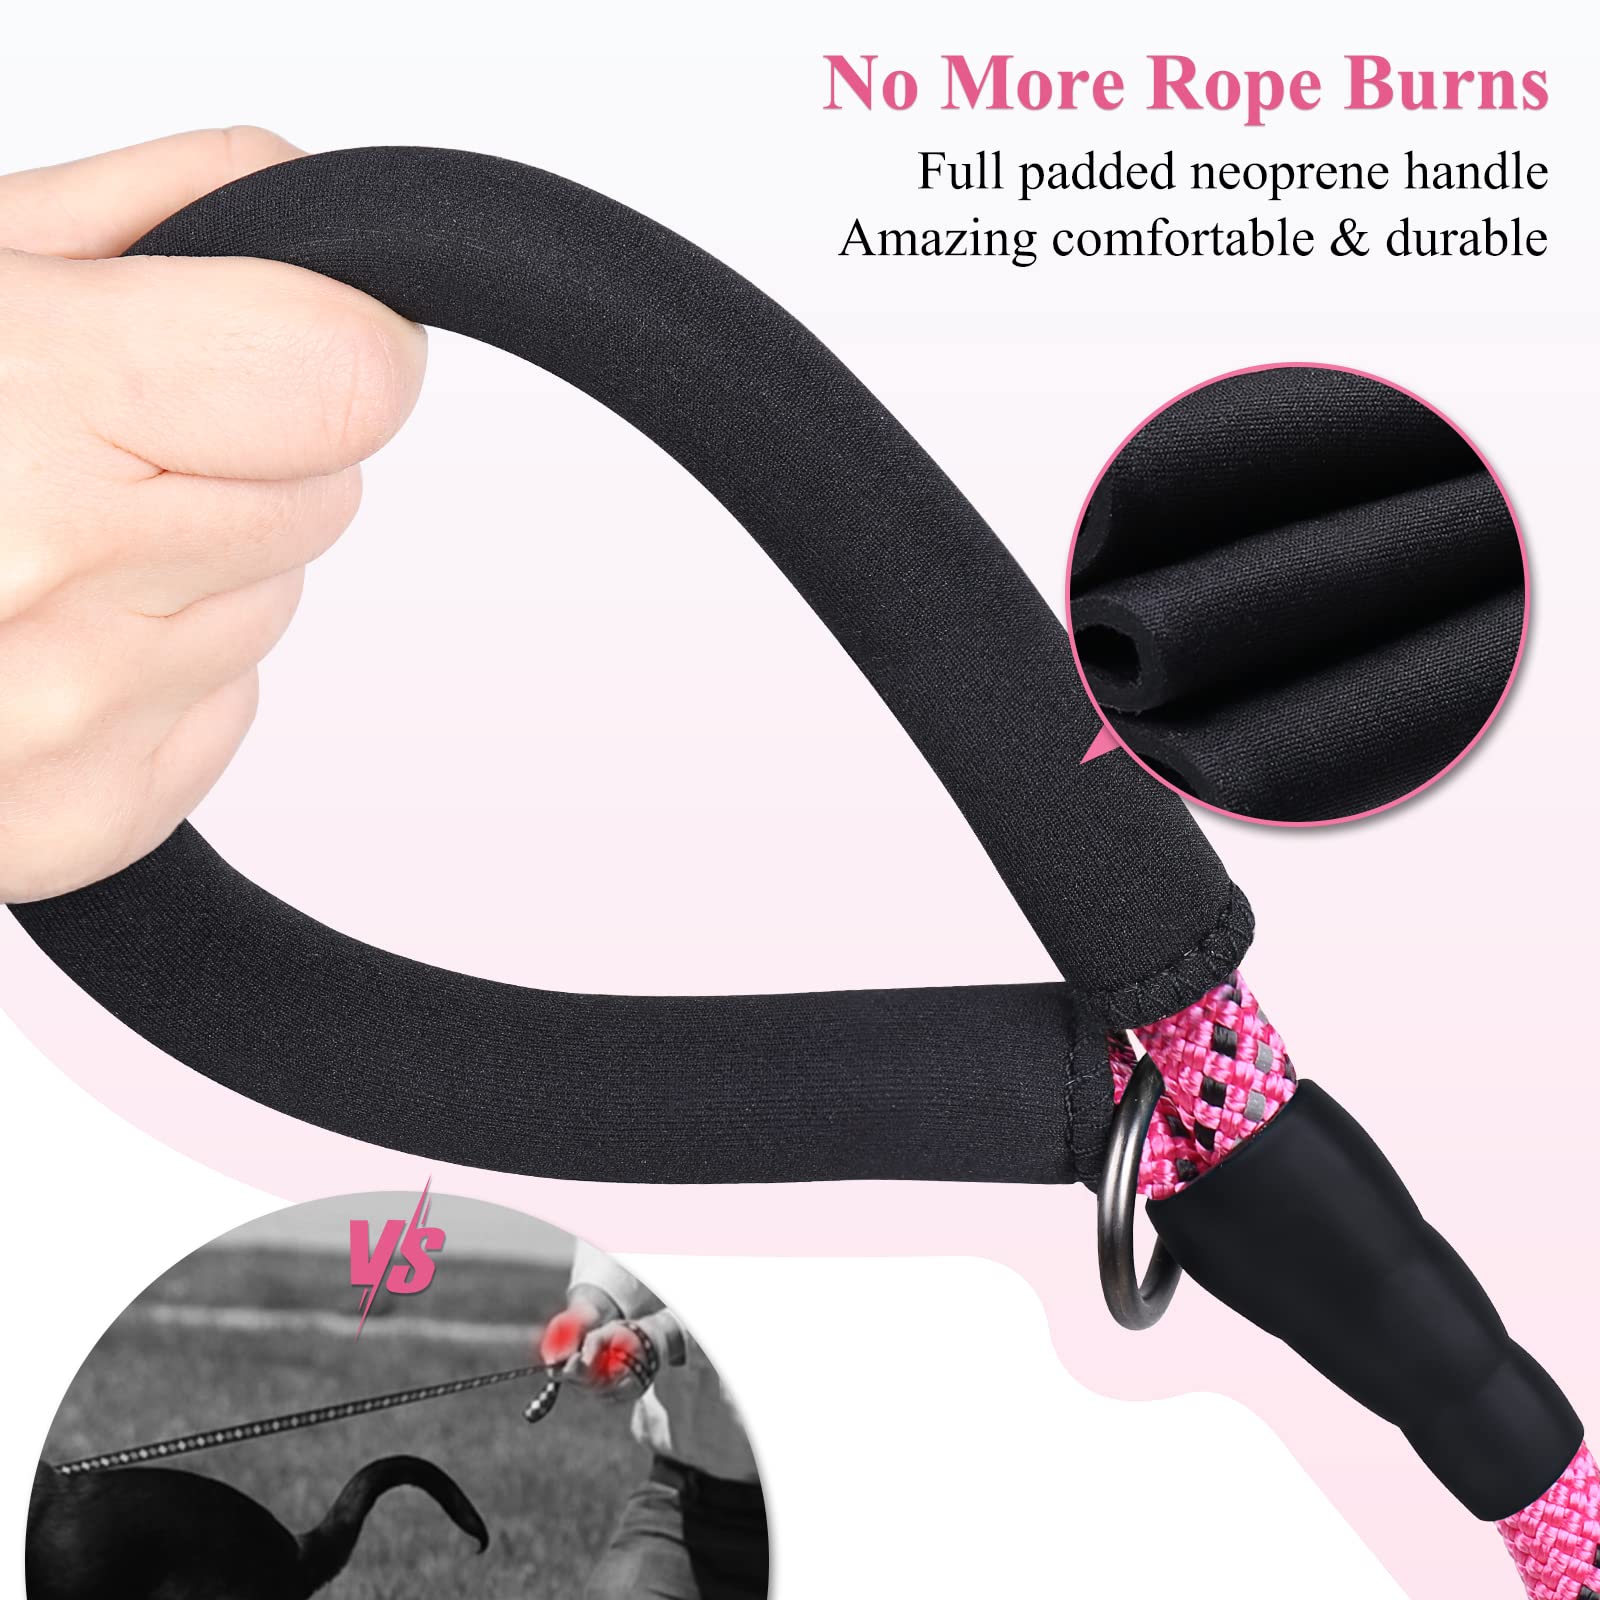 VIVAGLORY Short Dog Lead with Comfortable Padded Handle, 46cm Durable Rope Short Walking & Training Leashes for Dogs with Highly Reflective Threads for Medium & Large Dog, Pink